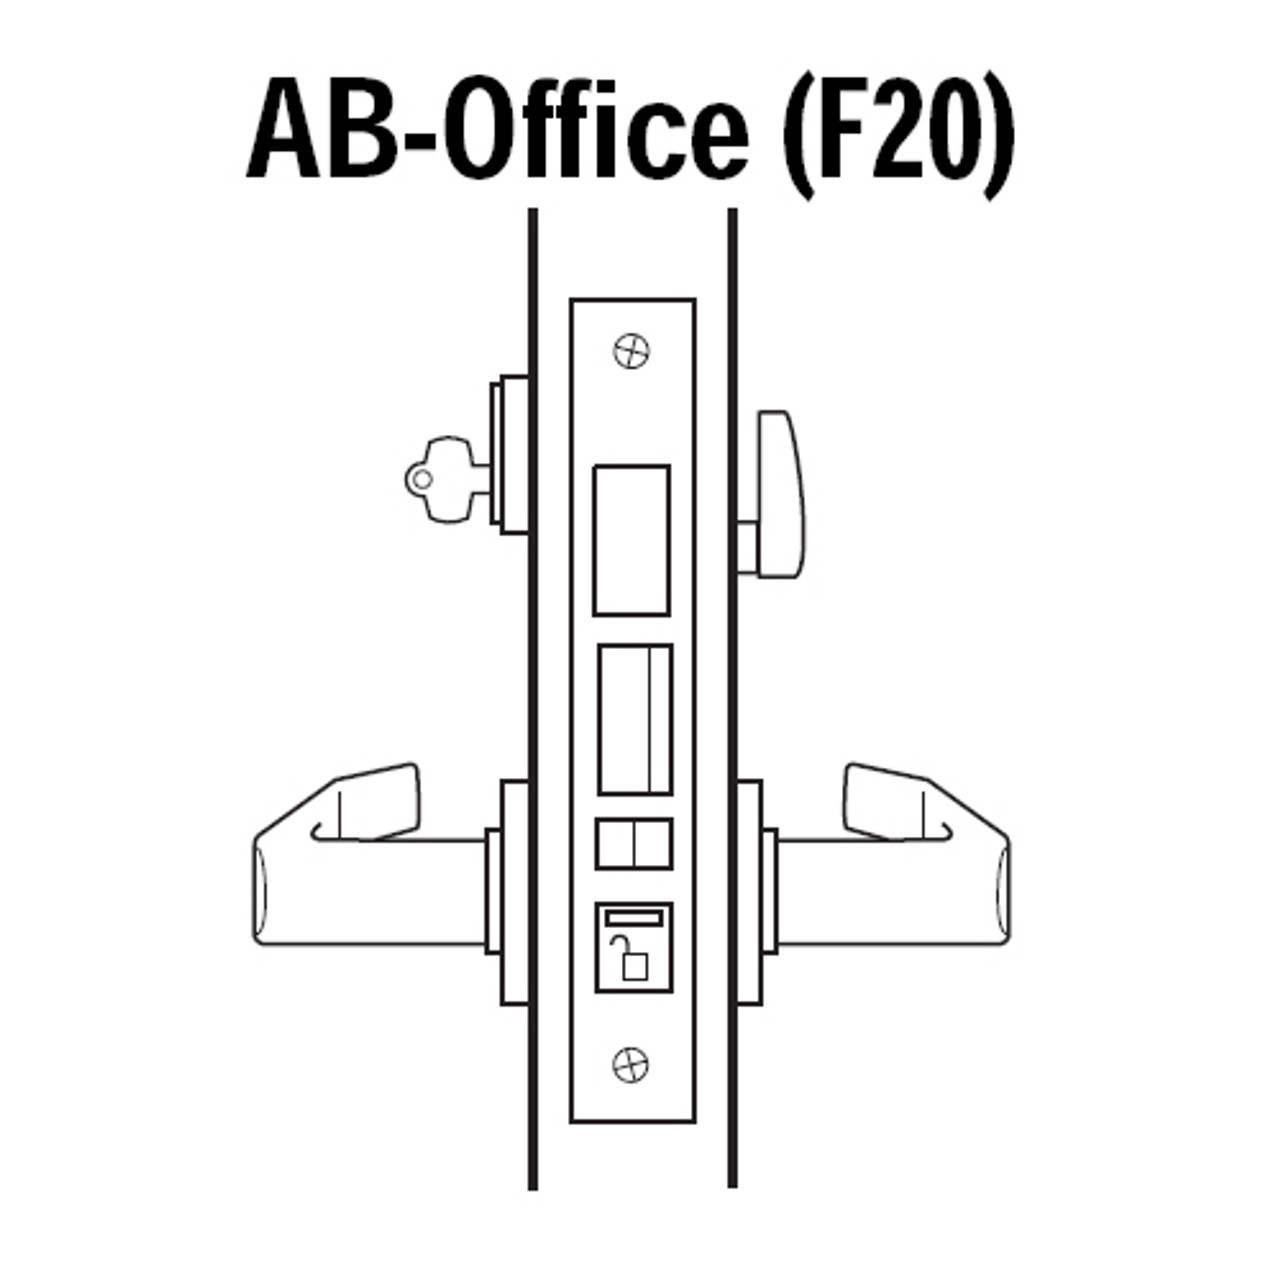 45H7AB12H618VIN Best 45H Series Office with Deadbolt Heavy Duty Mortise Lever Lock with Solid Tube with No Return and Visual Keyed Indicator in Bright Nickel